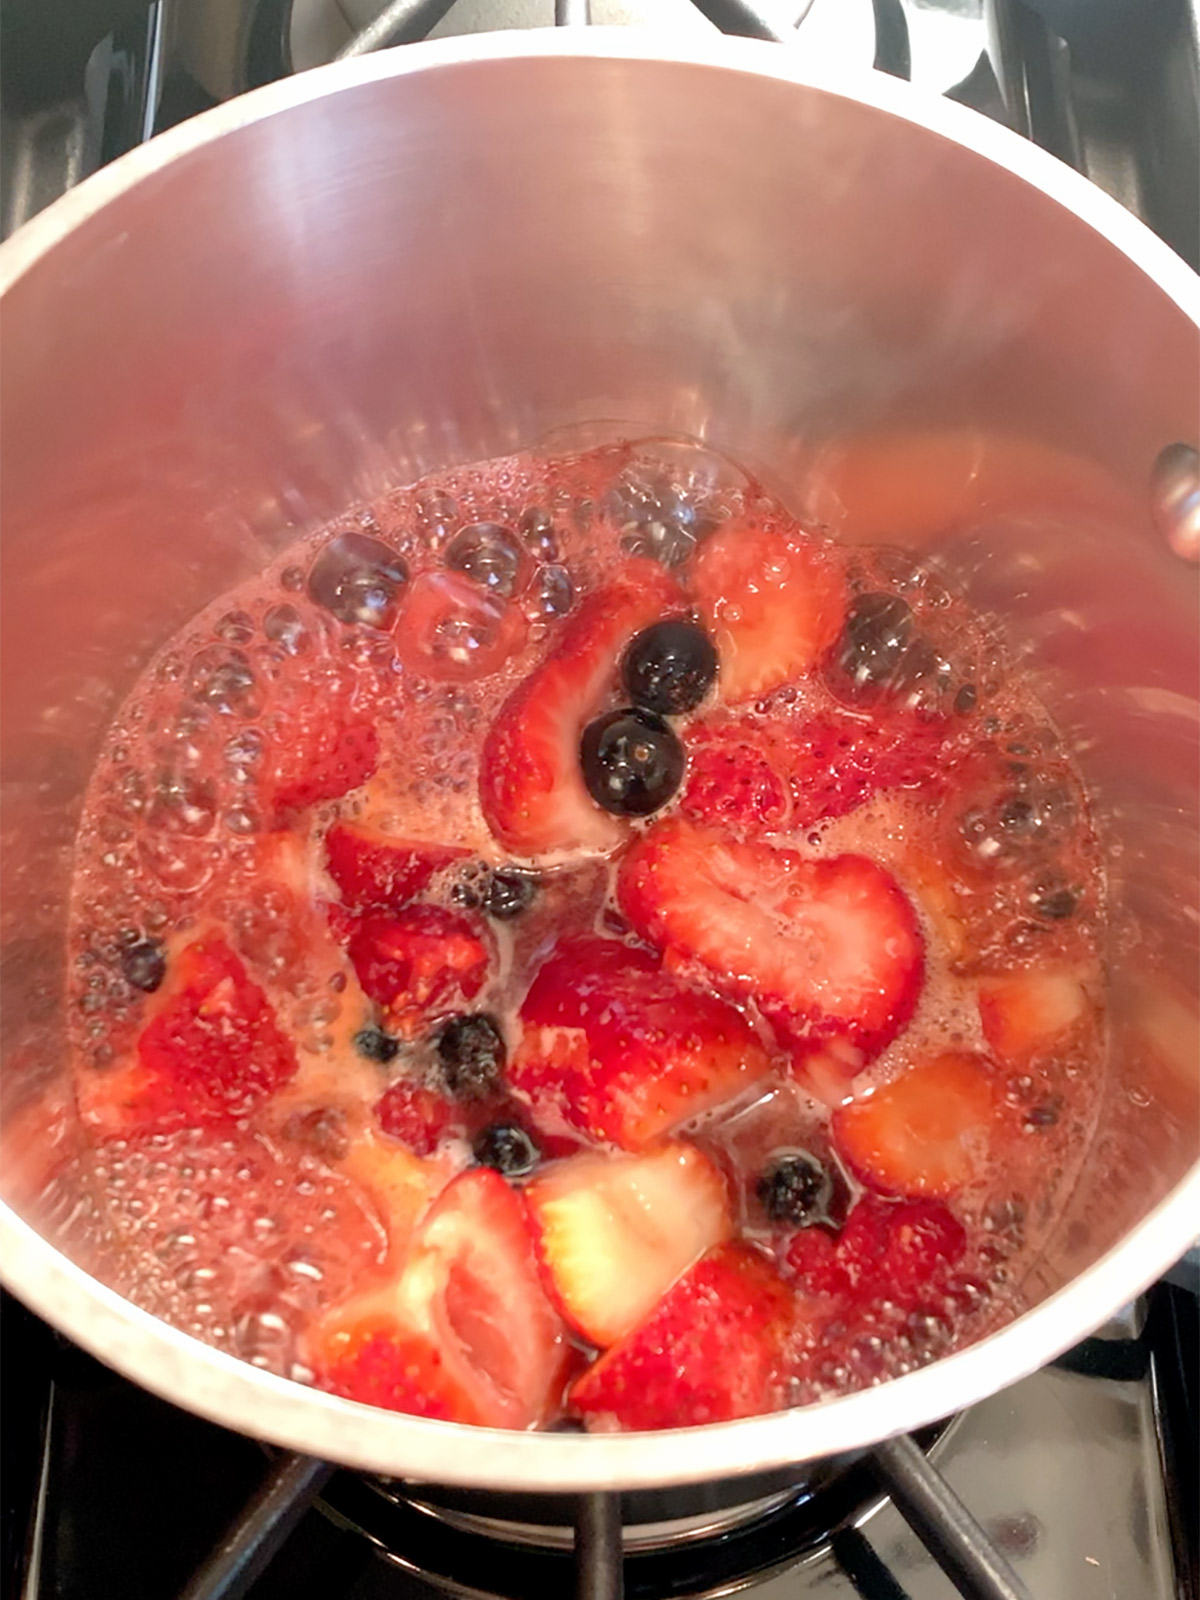 Berry compote boiling in the pot on the stove.